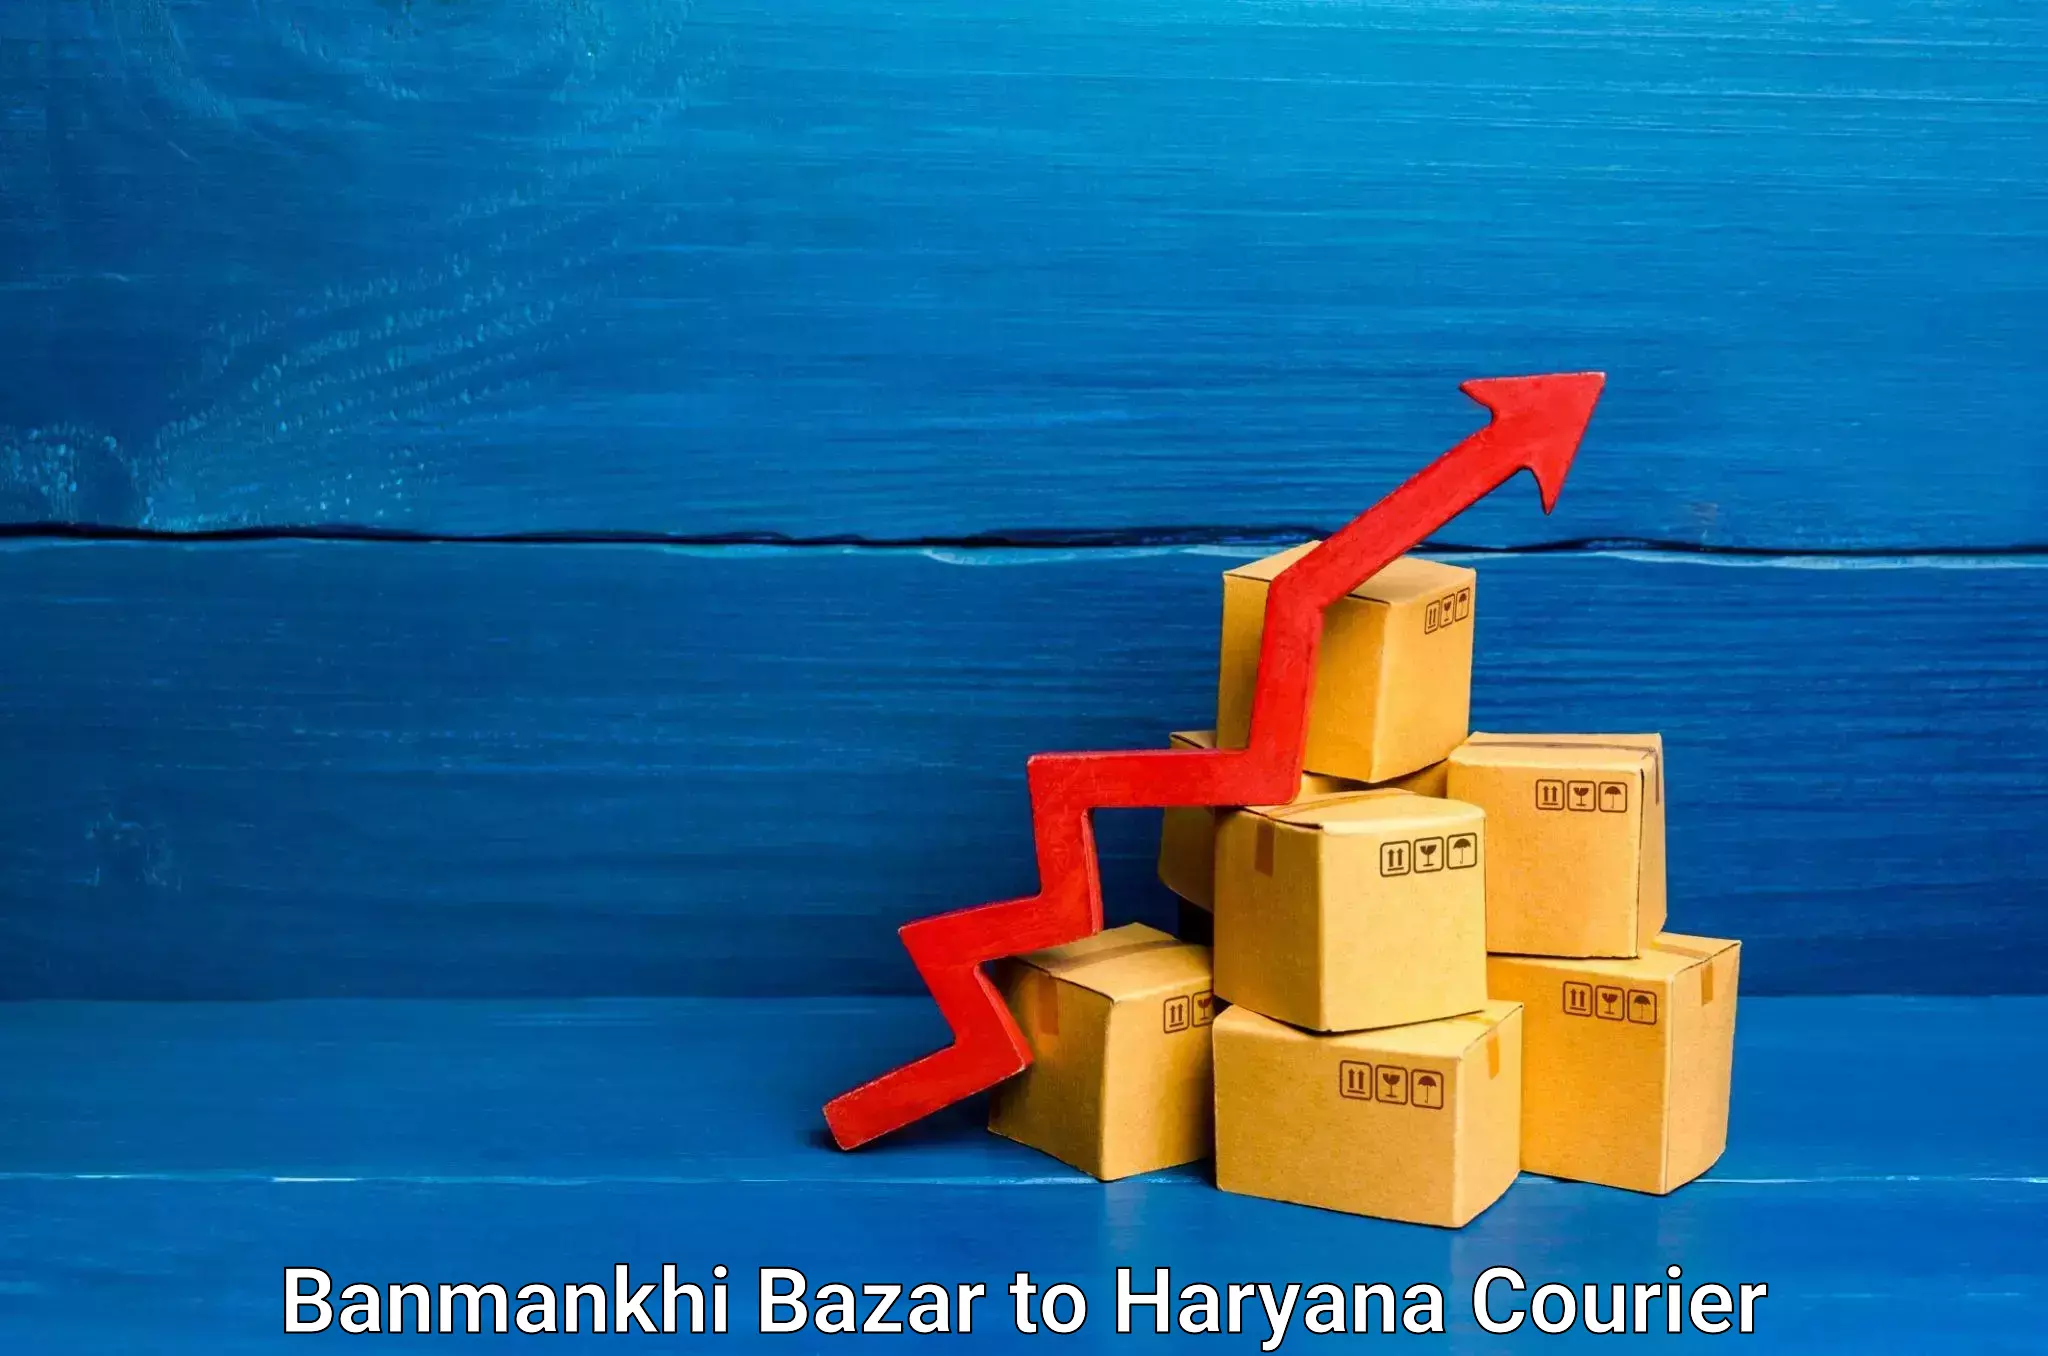 Home relocation experts in Banmankhi Bazar to Haryana